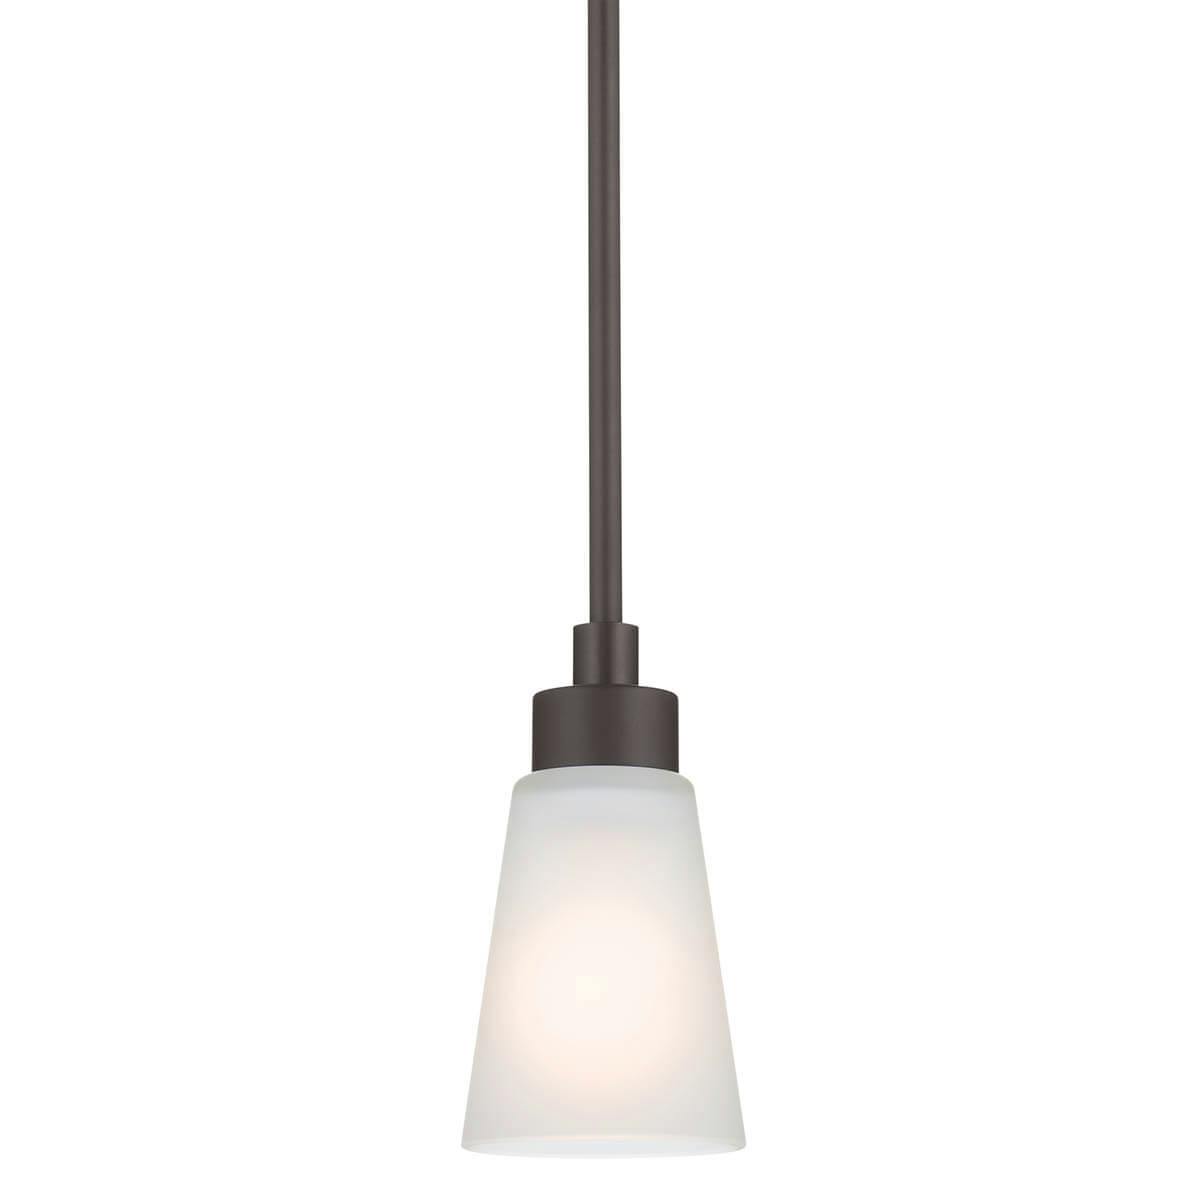 Erma 4.25" Mini Pendant Olde Bronze without the canopy on a white background